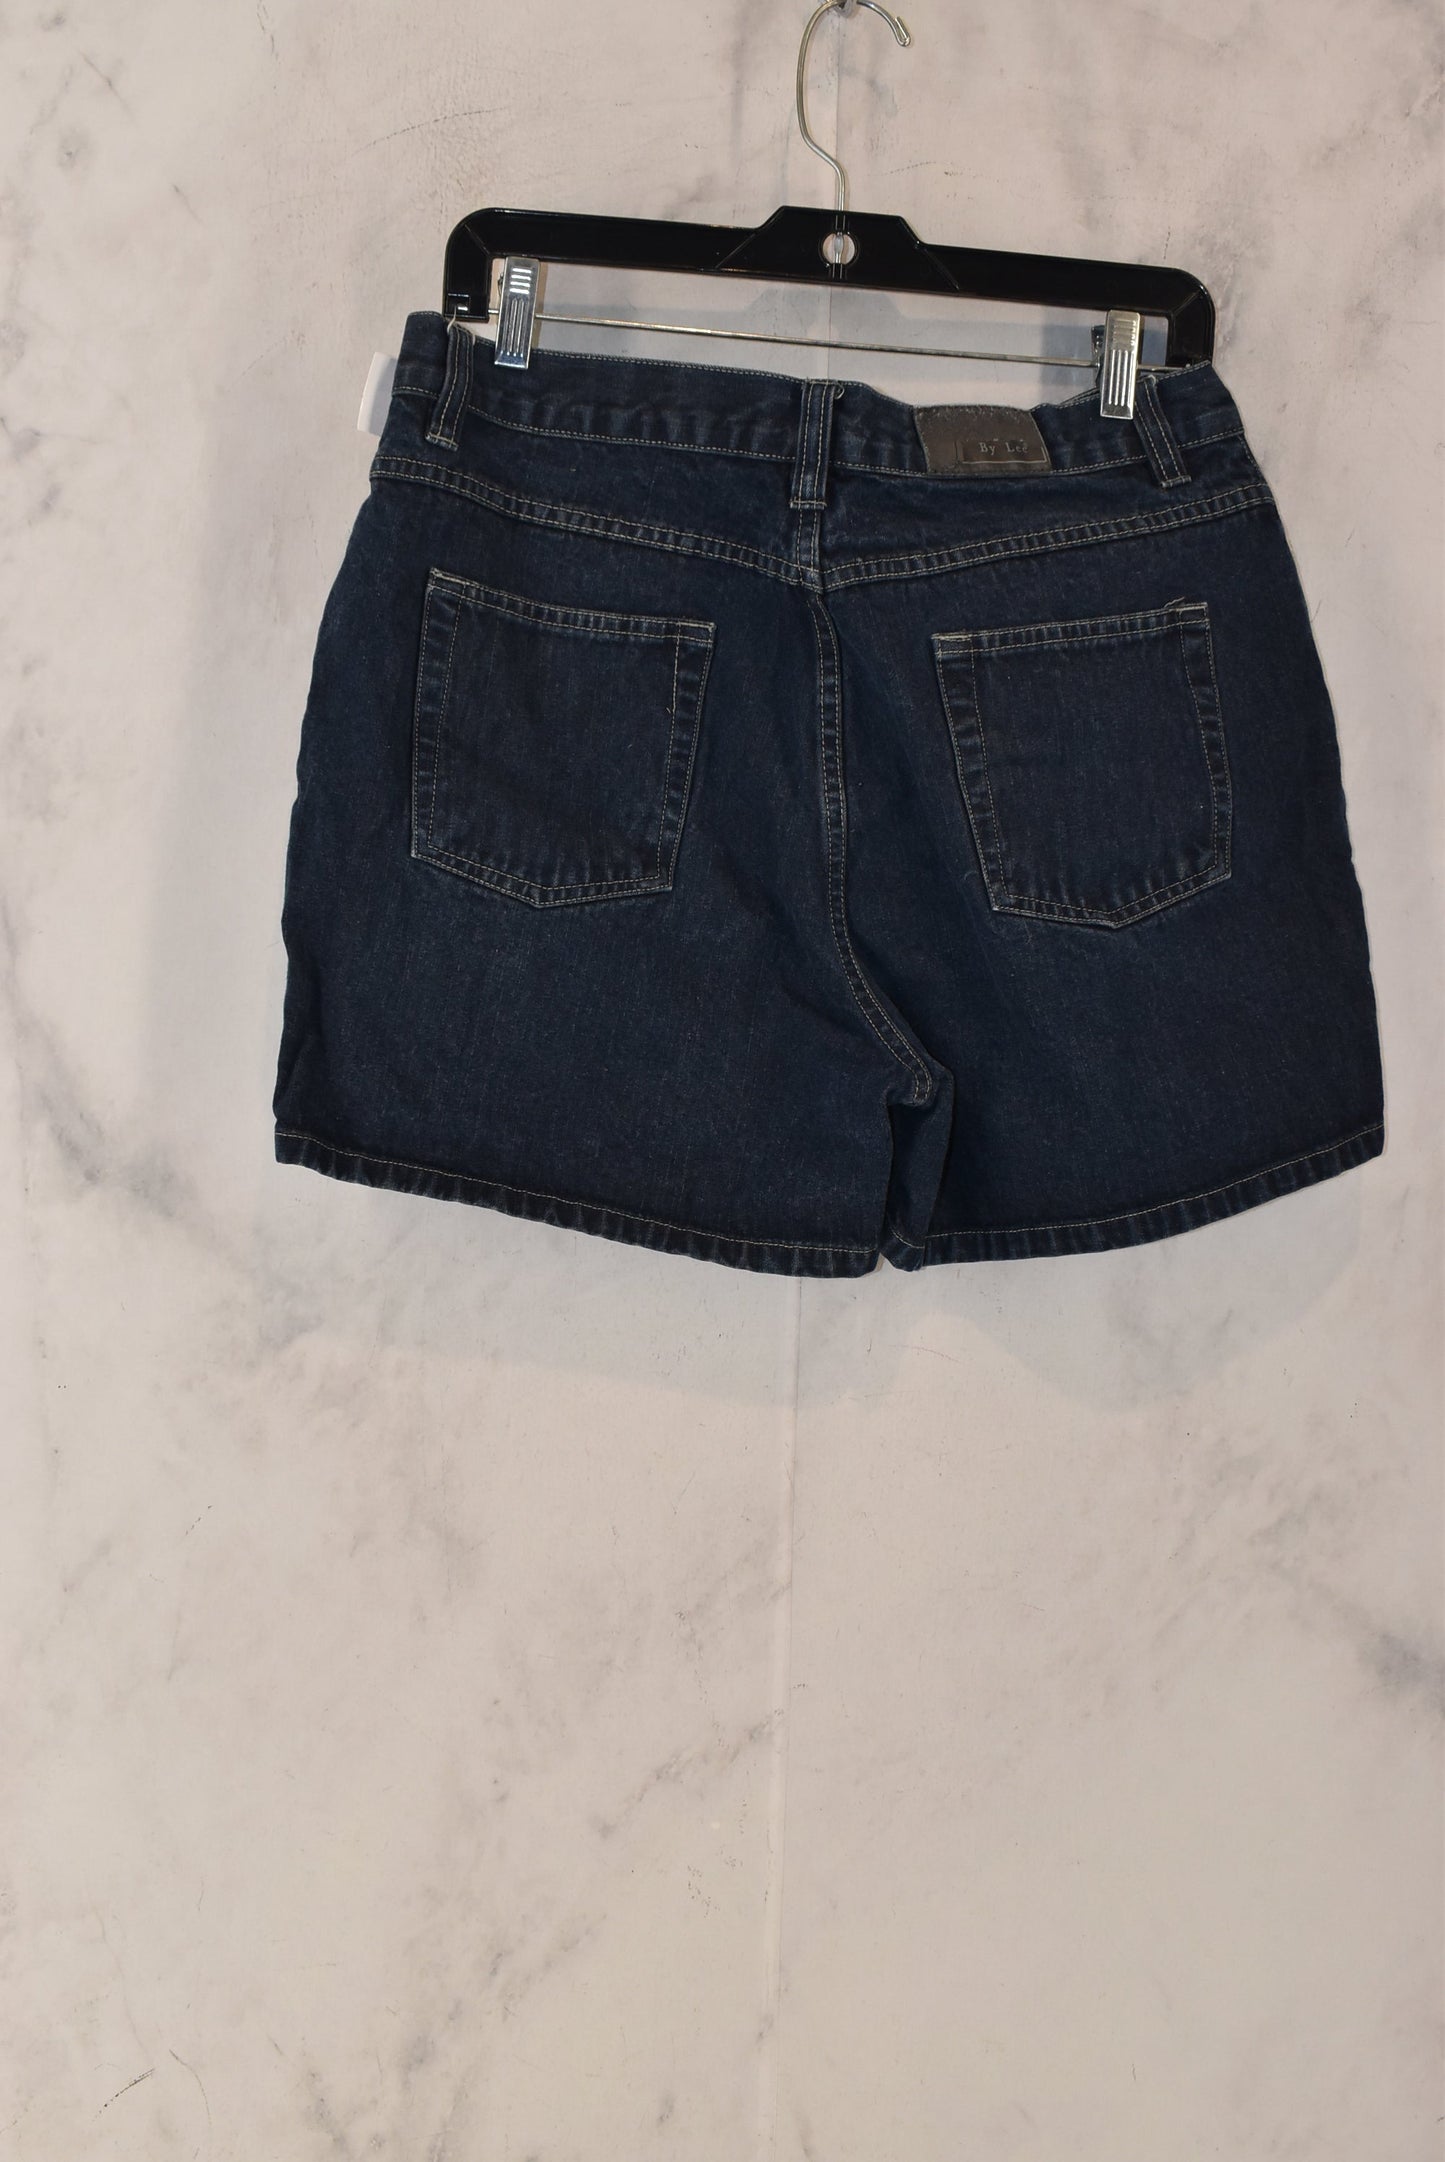 Shorts By Lee  Size: 2x